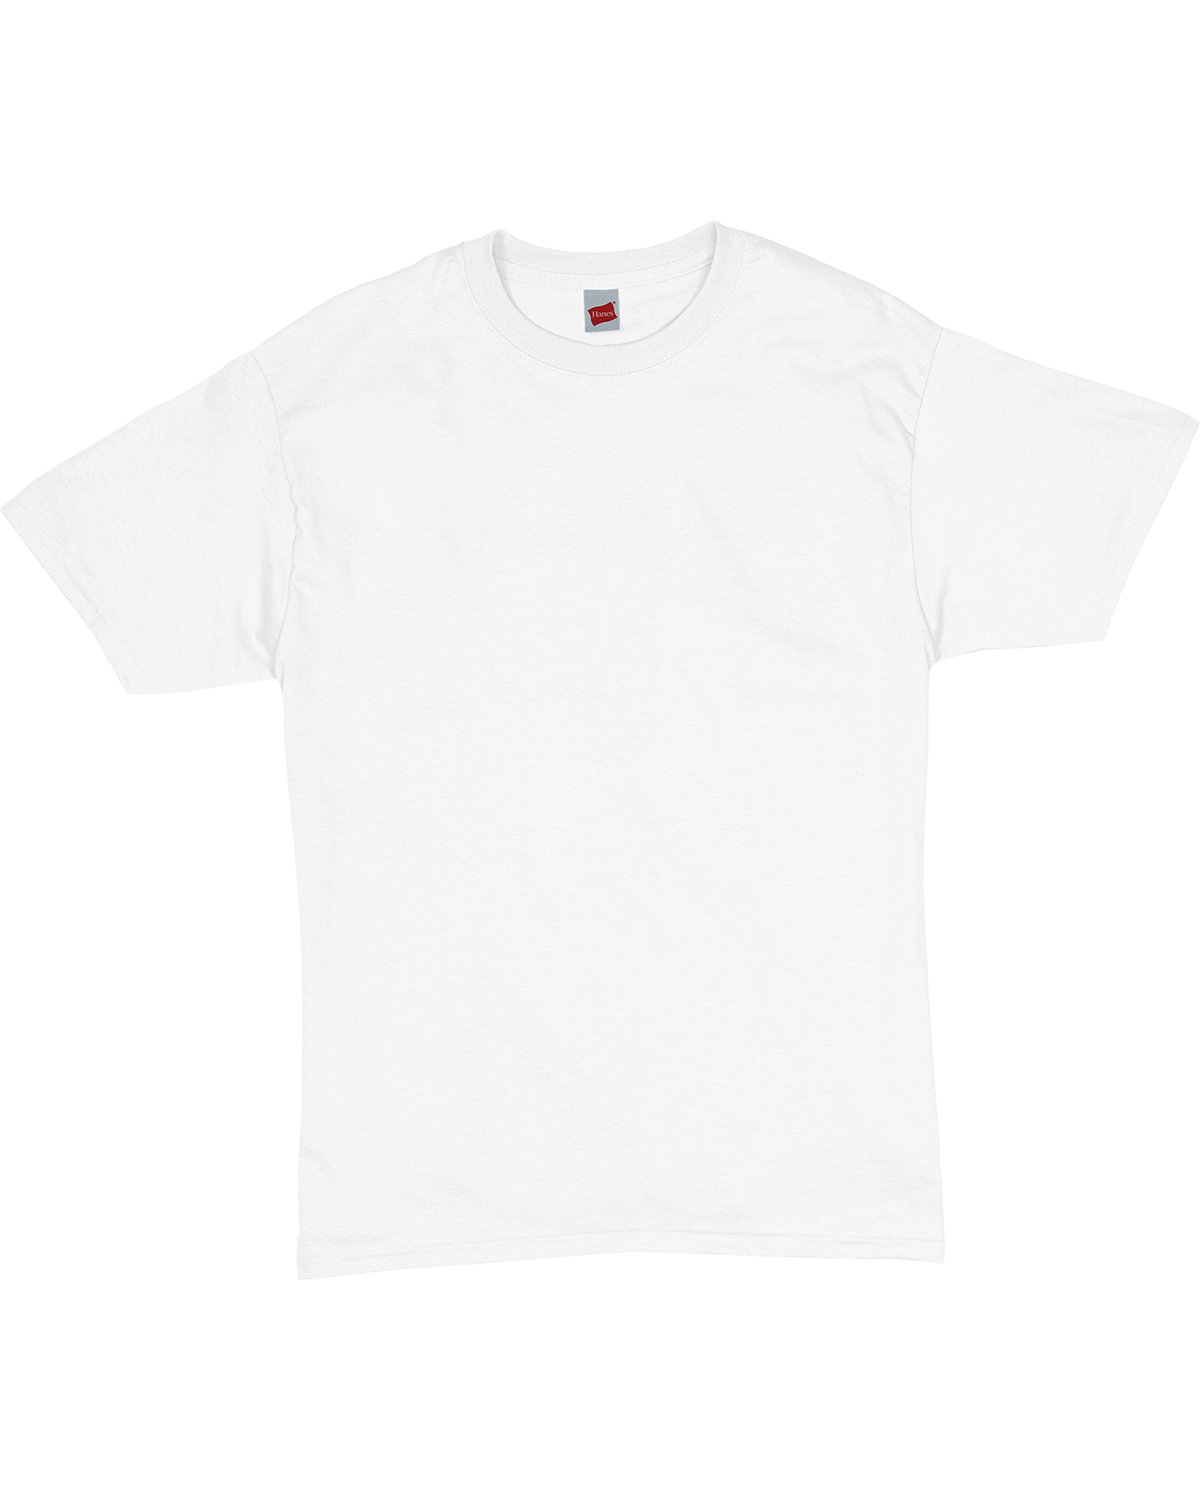 Hanes Adult Essential Short Sleeve T-Shirt | US Generic Non-Priced